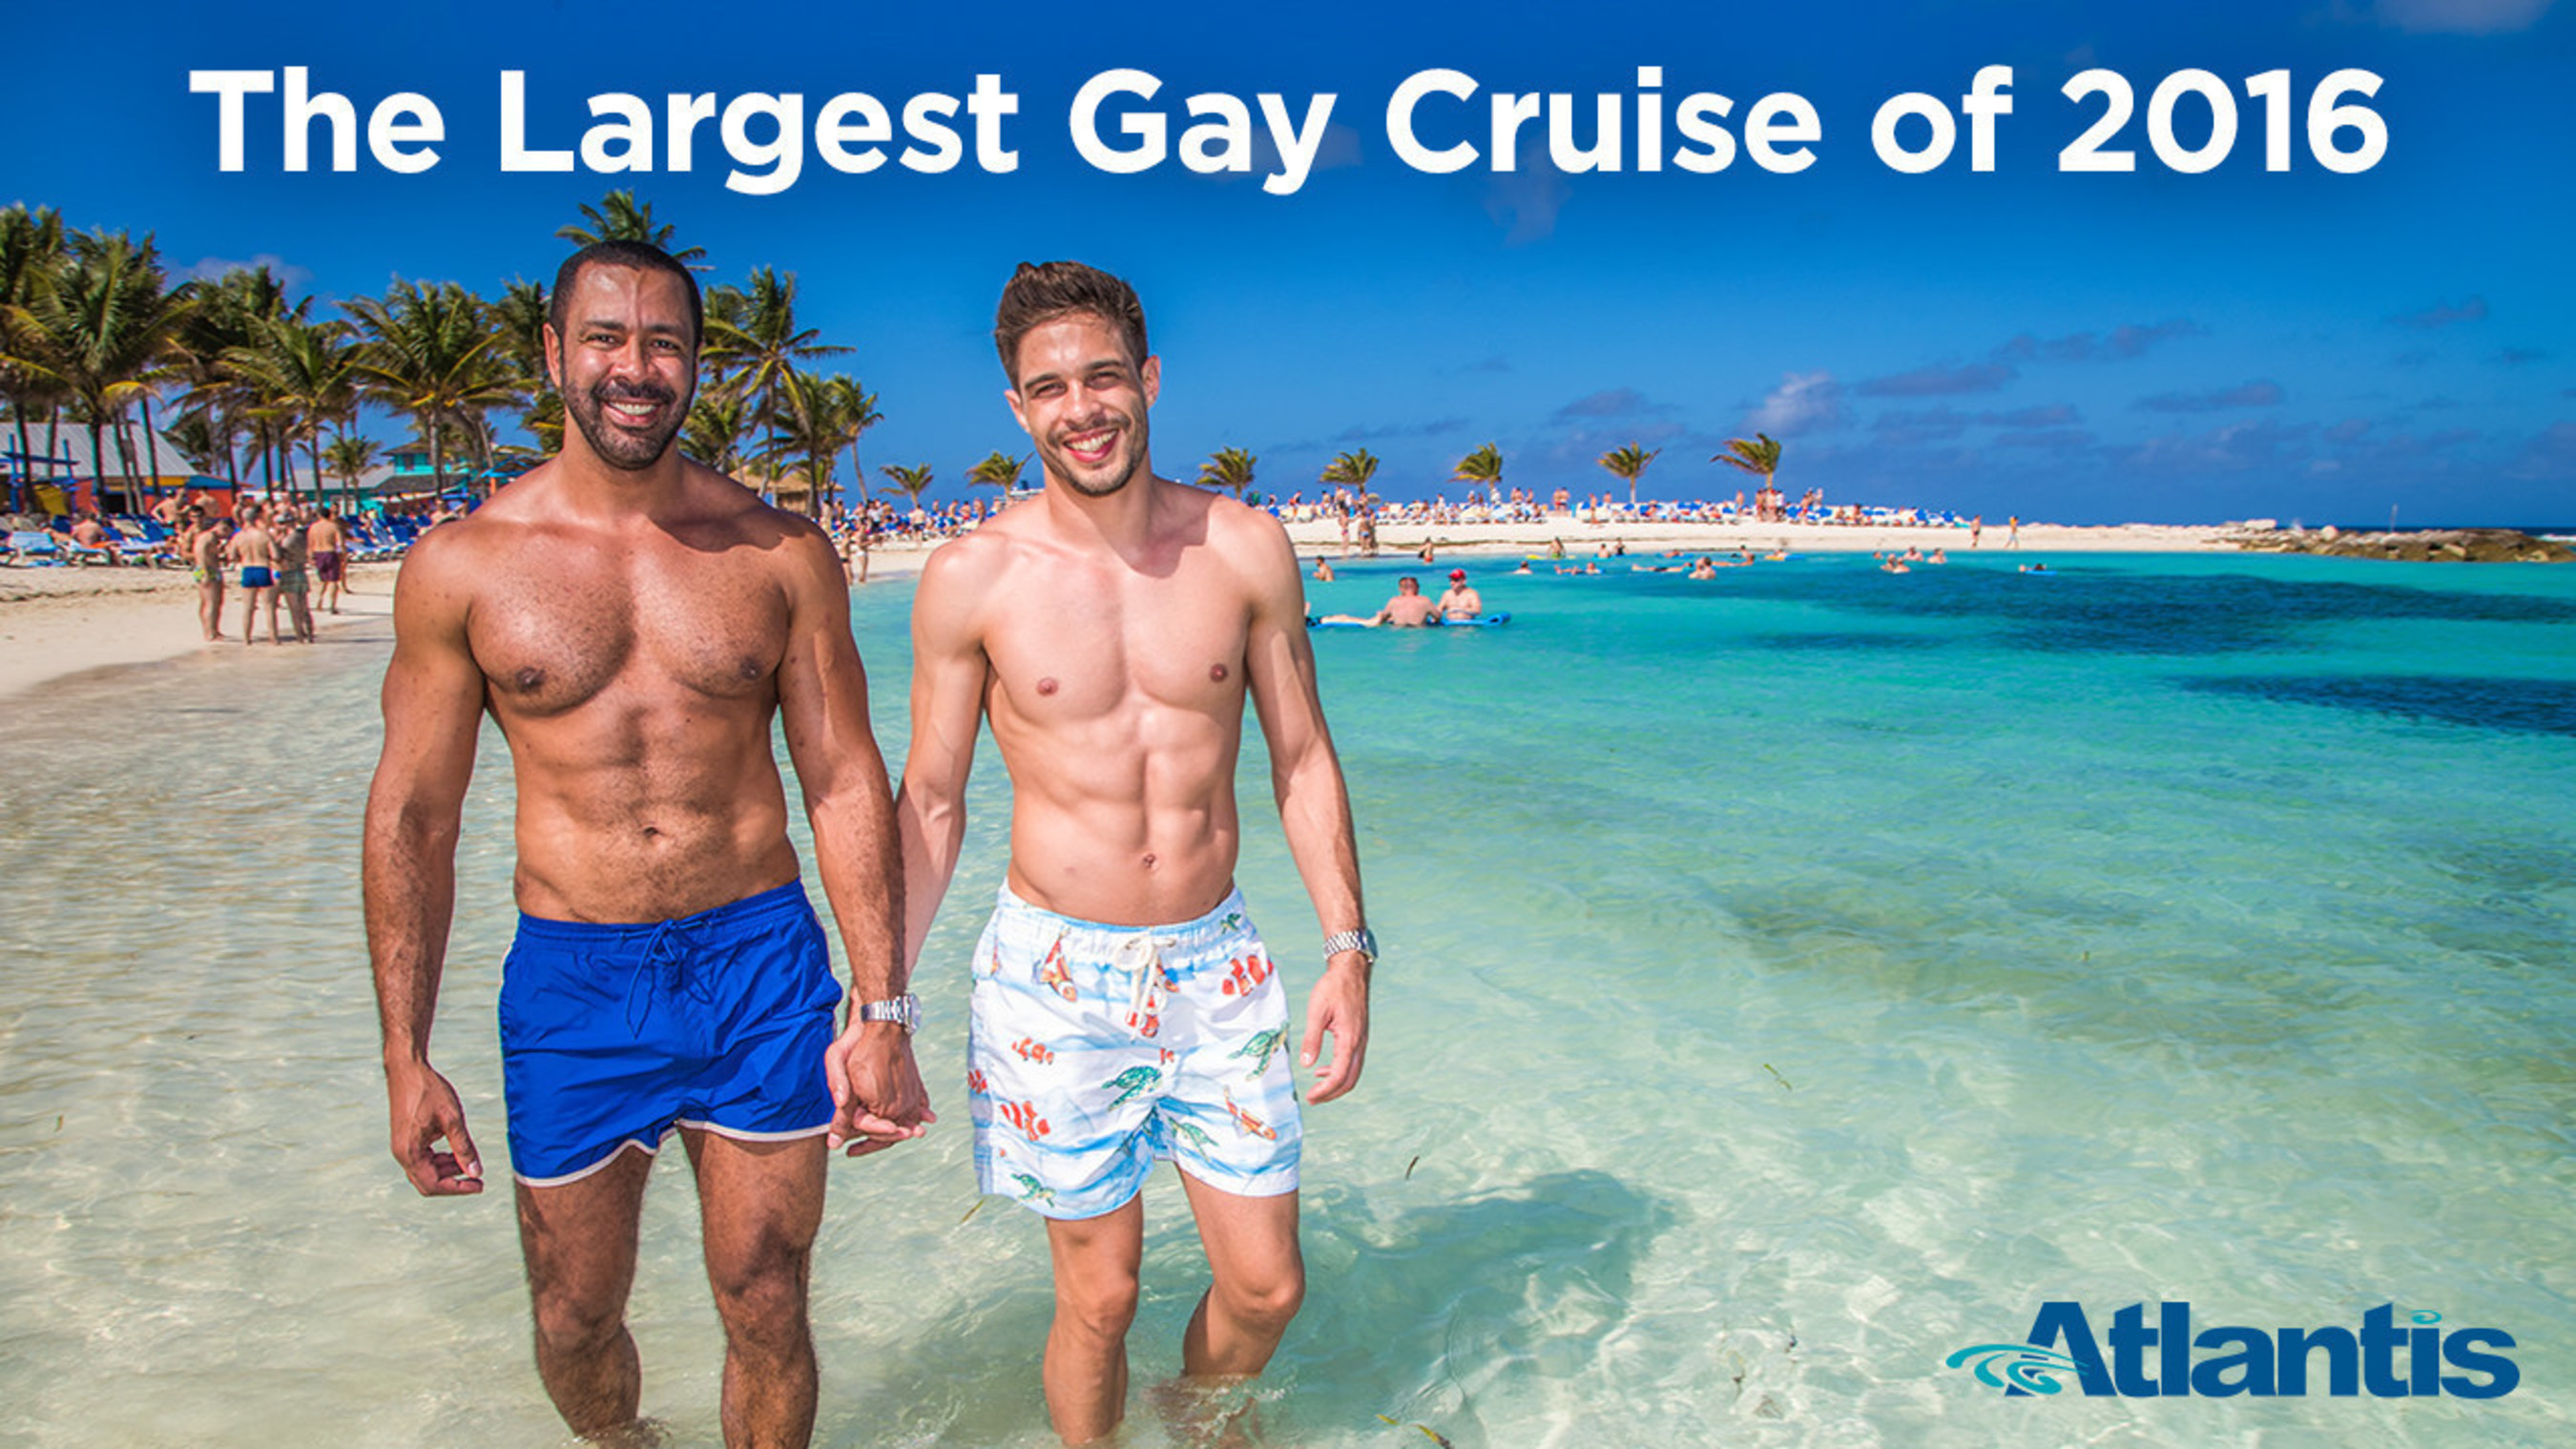 movie with gay cruise